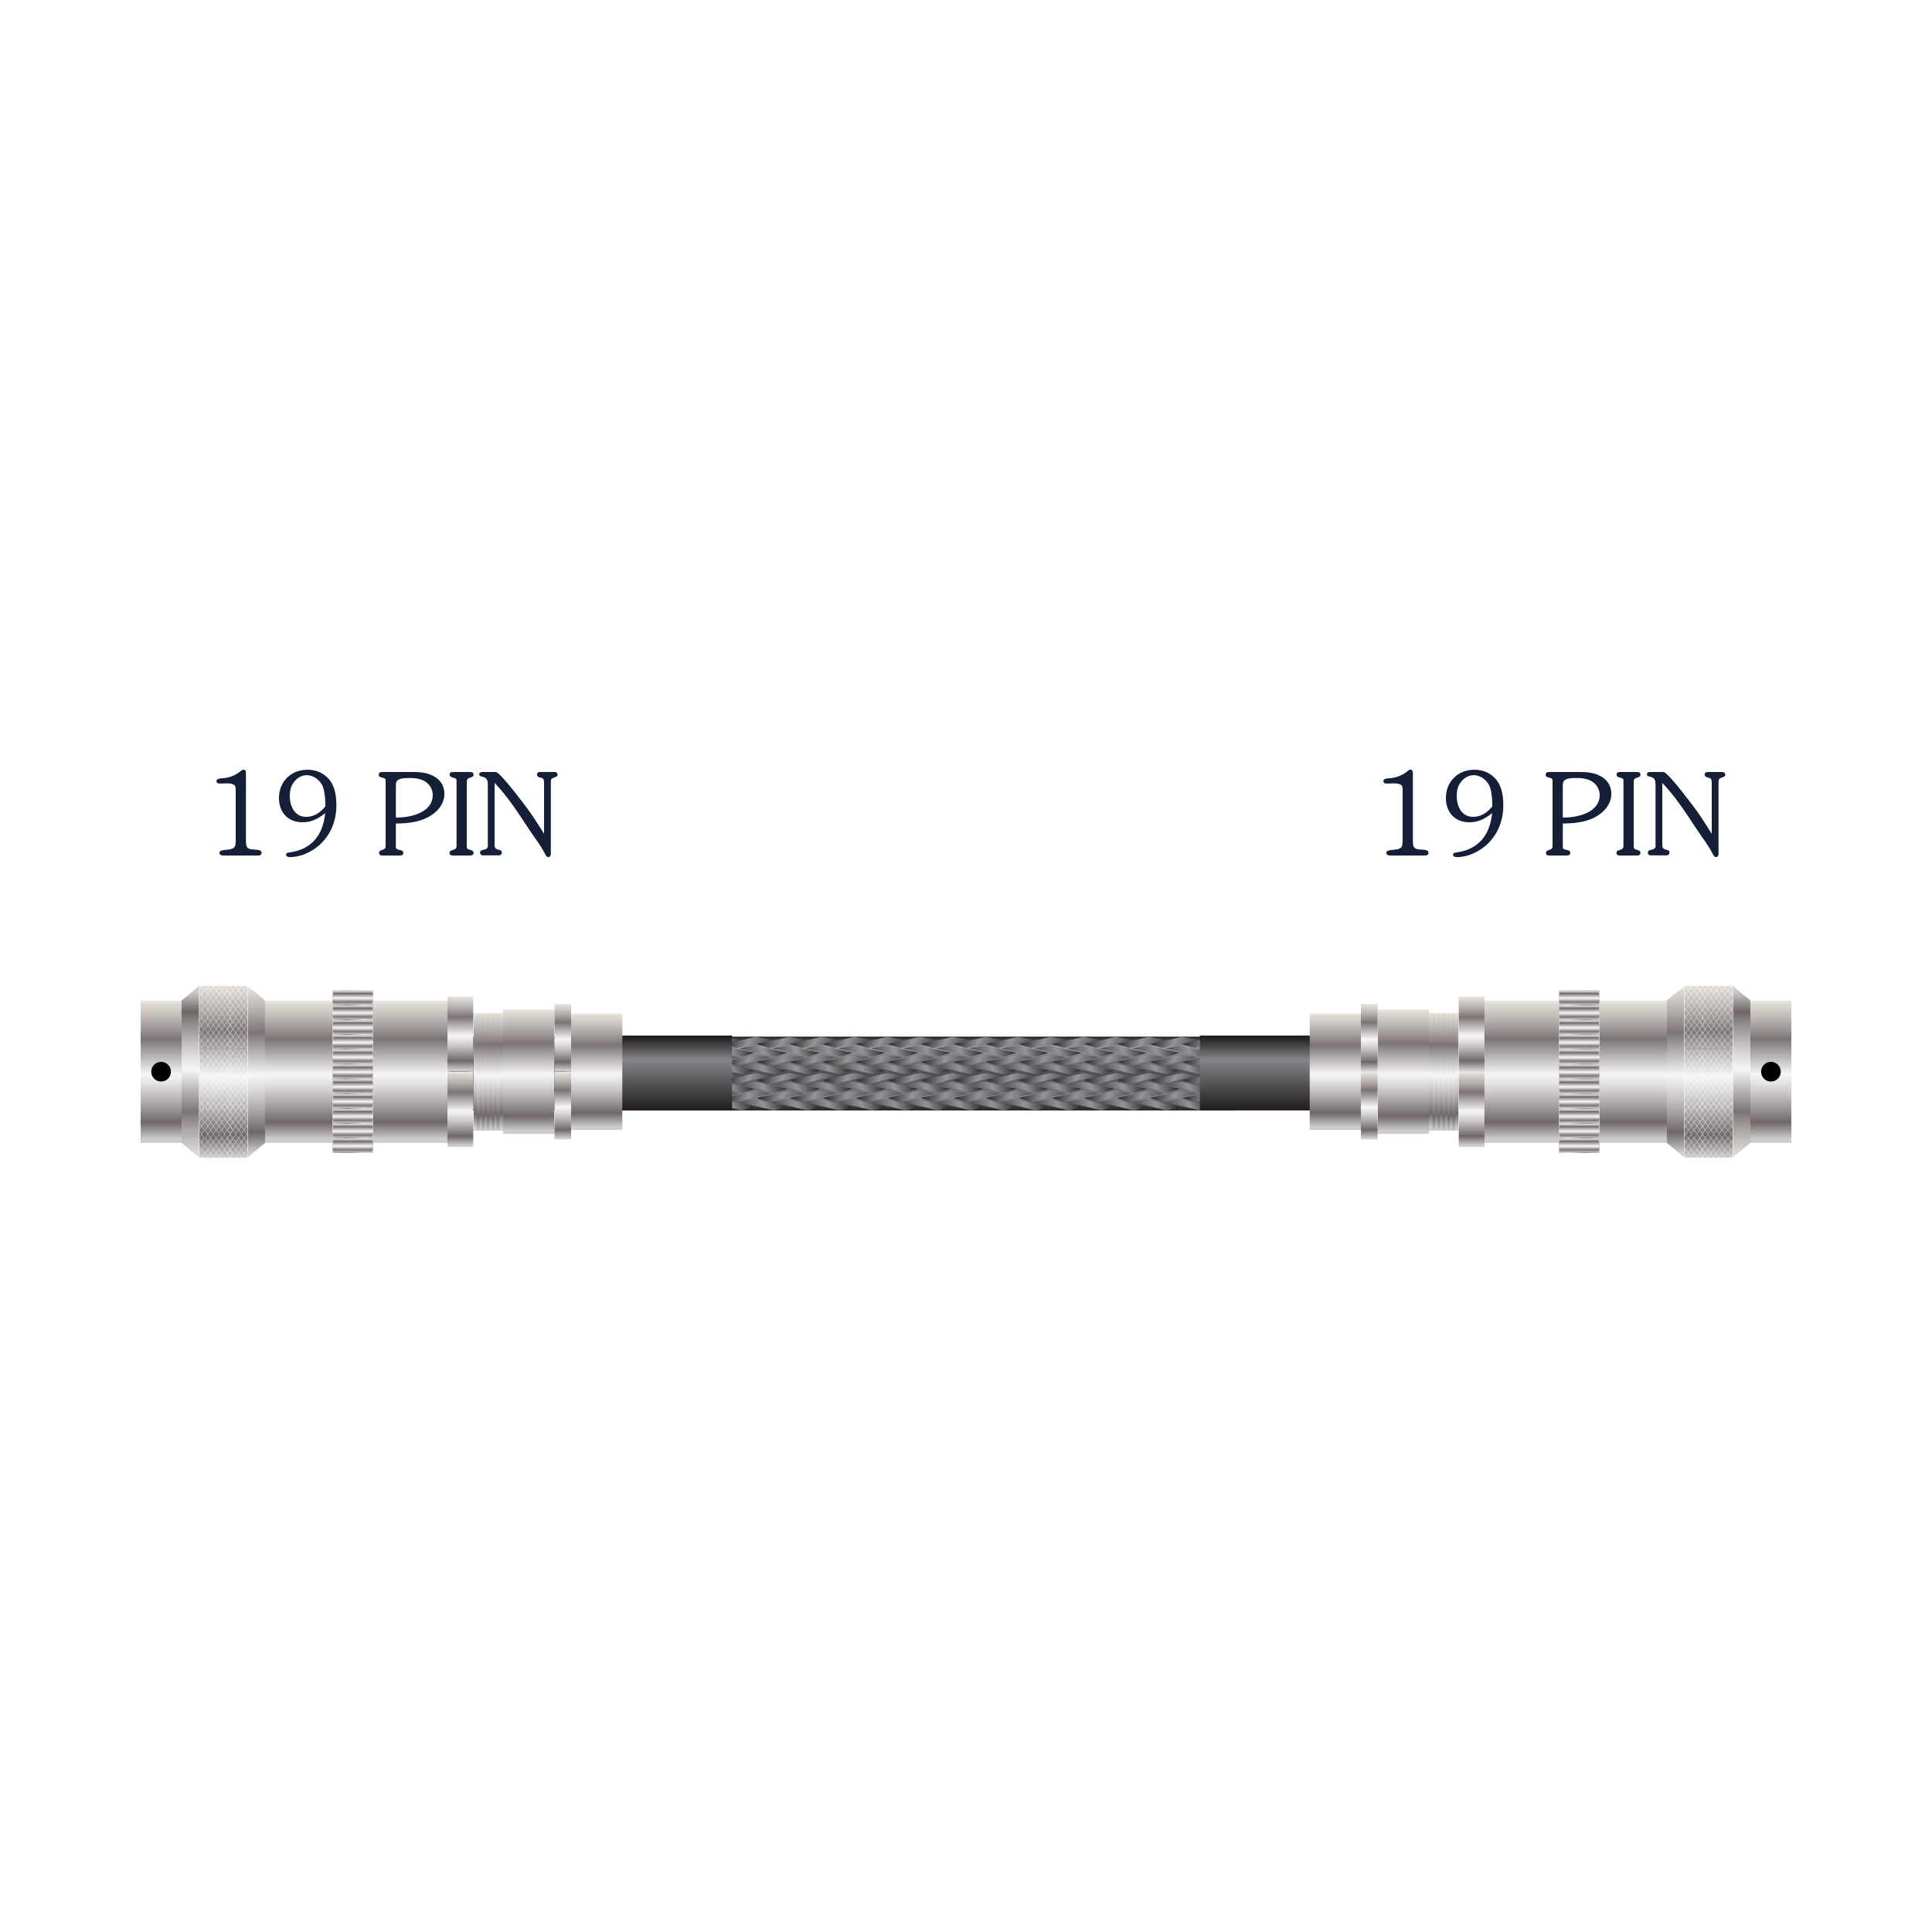 <p align="center">Tyr 2 Specialty 19 Pin Cable</p>